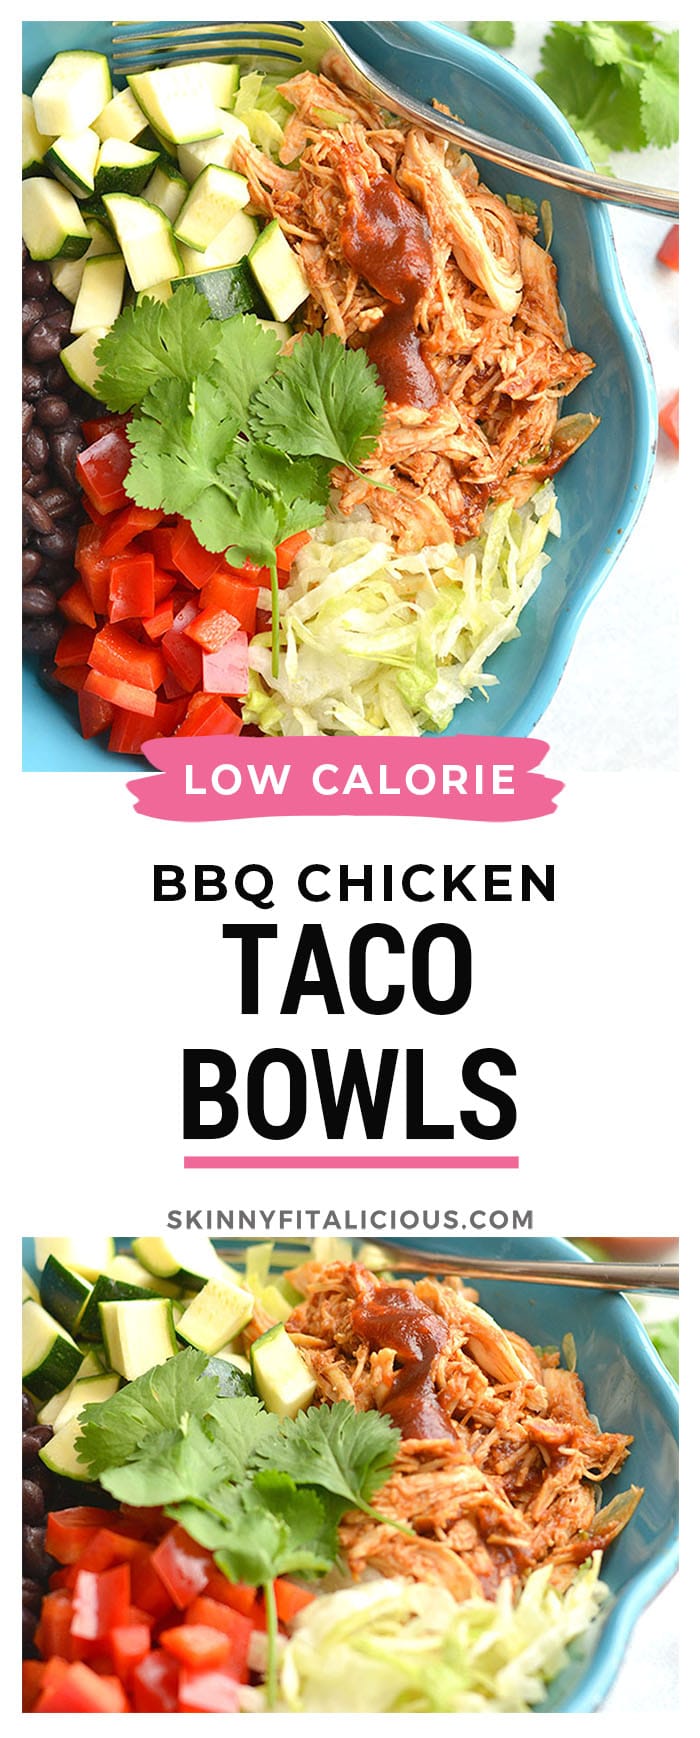 These BBQ Chicken Taco Bowls are the perfect combination of Mexican and summer BBQ flavors. A protein-packed, Gluten-Free, EASY meal prep recipe for a make ahead lunch or dinner. Gluten Free + Low Calorie